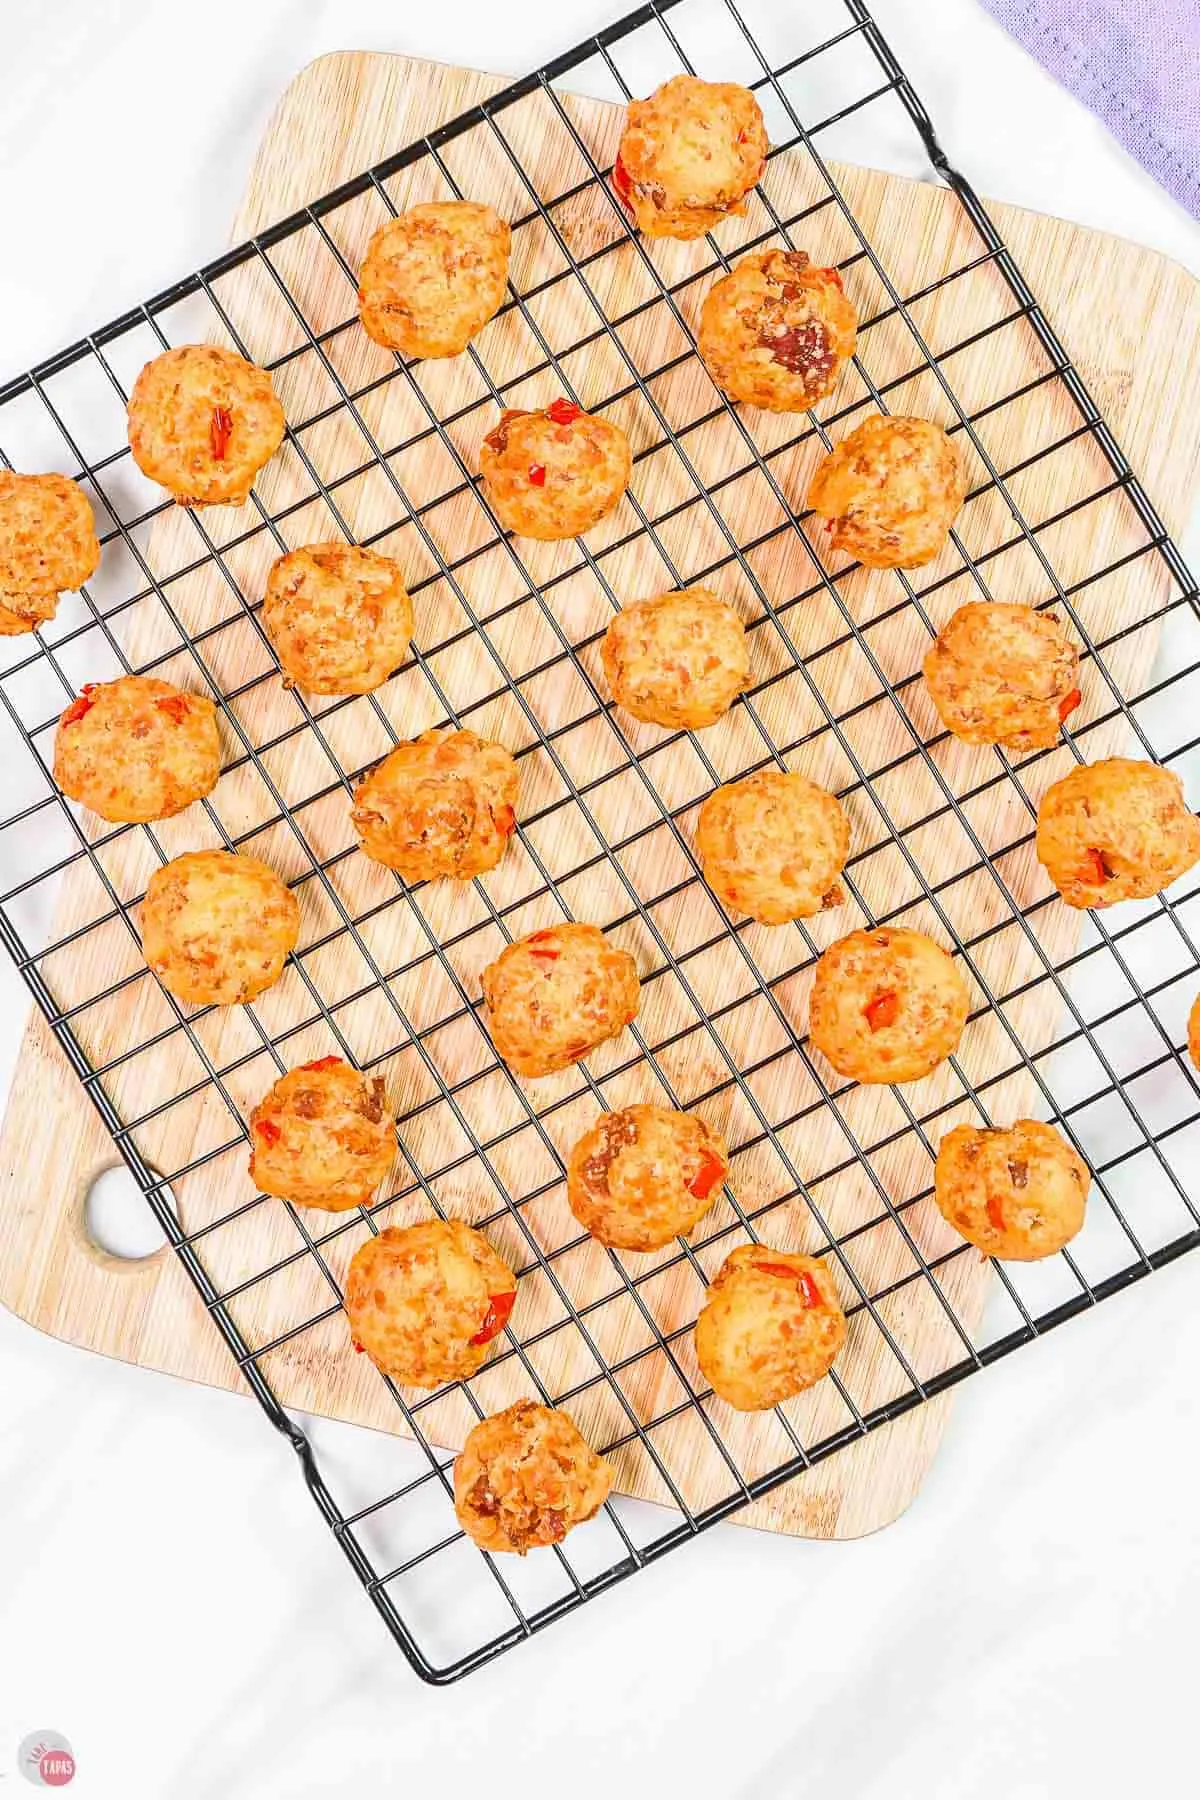 baked sausage balls on a wire rack